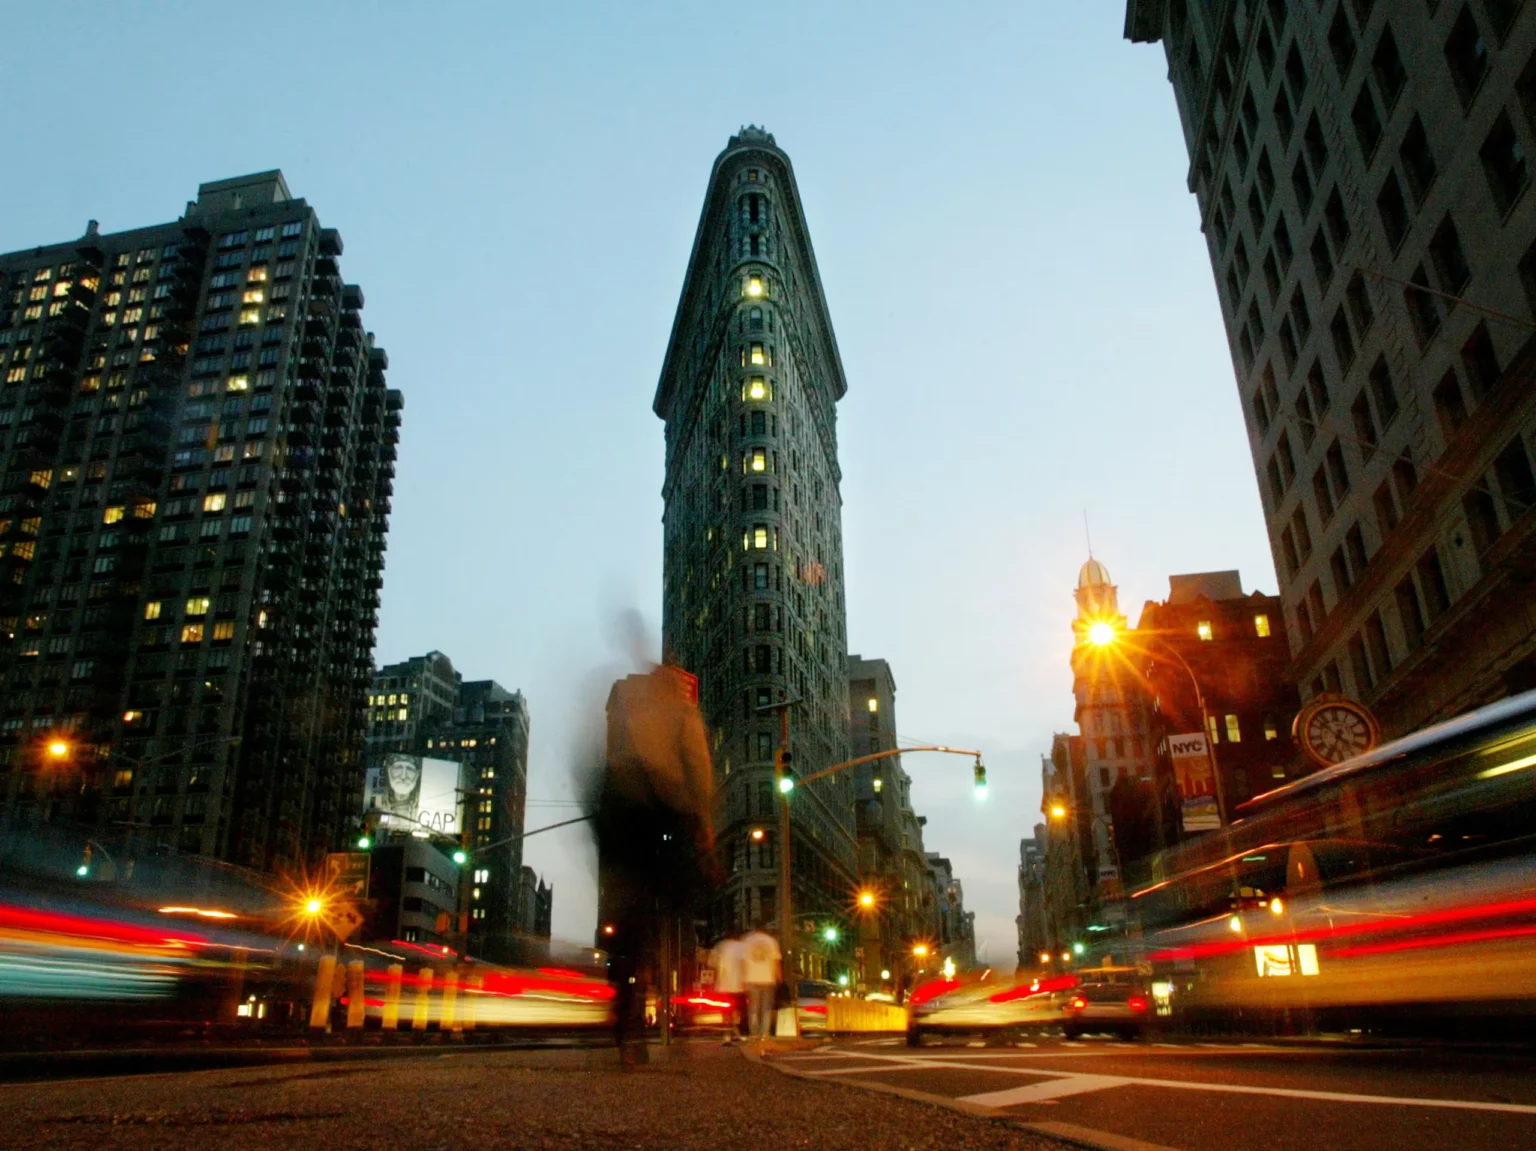 flatiron-building-to-be-converted-into-condos-with-estimated-cost-of-3k-a-square-foot-says-new-owners